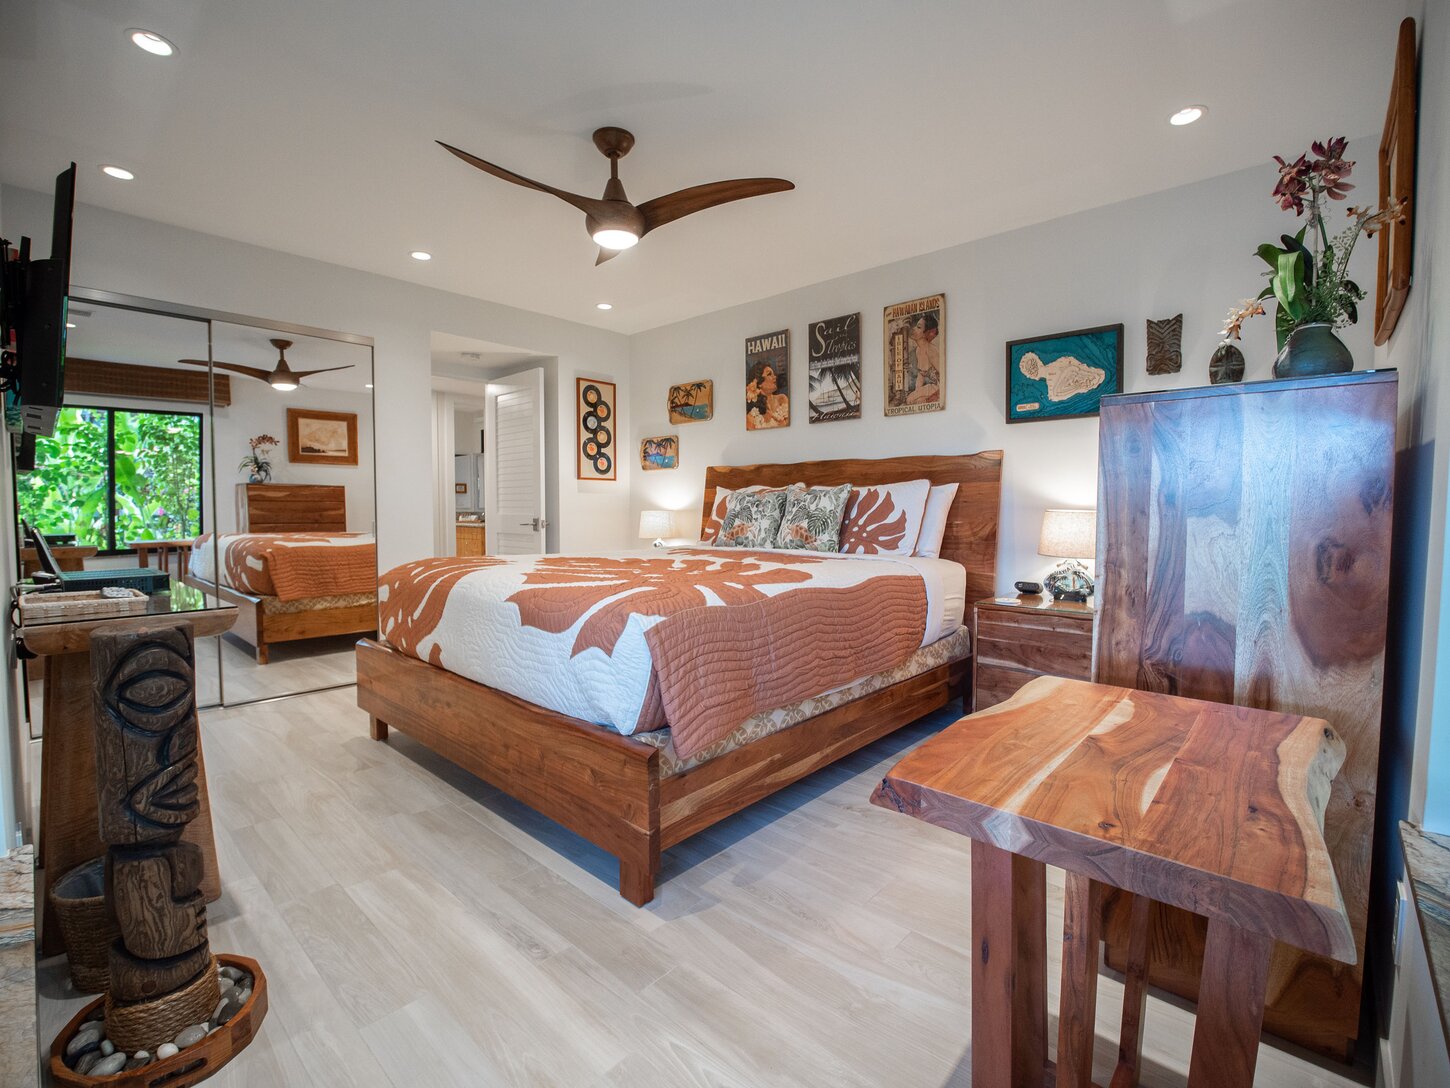 Luxury guest bedroom features a king bed, and live-edge, solid acacia wood furnishings